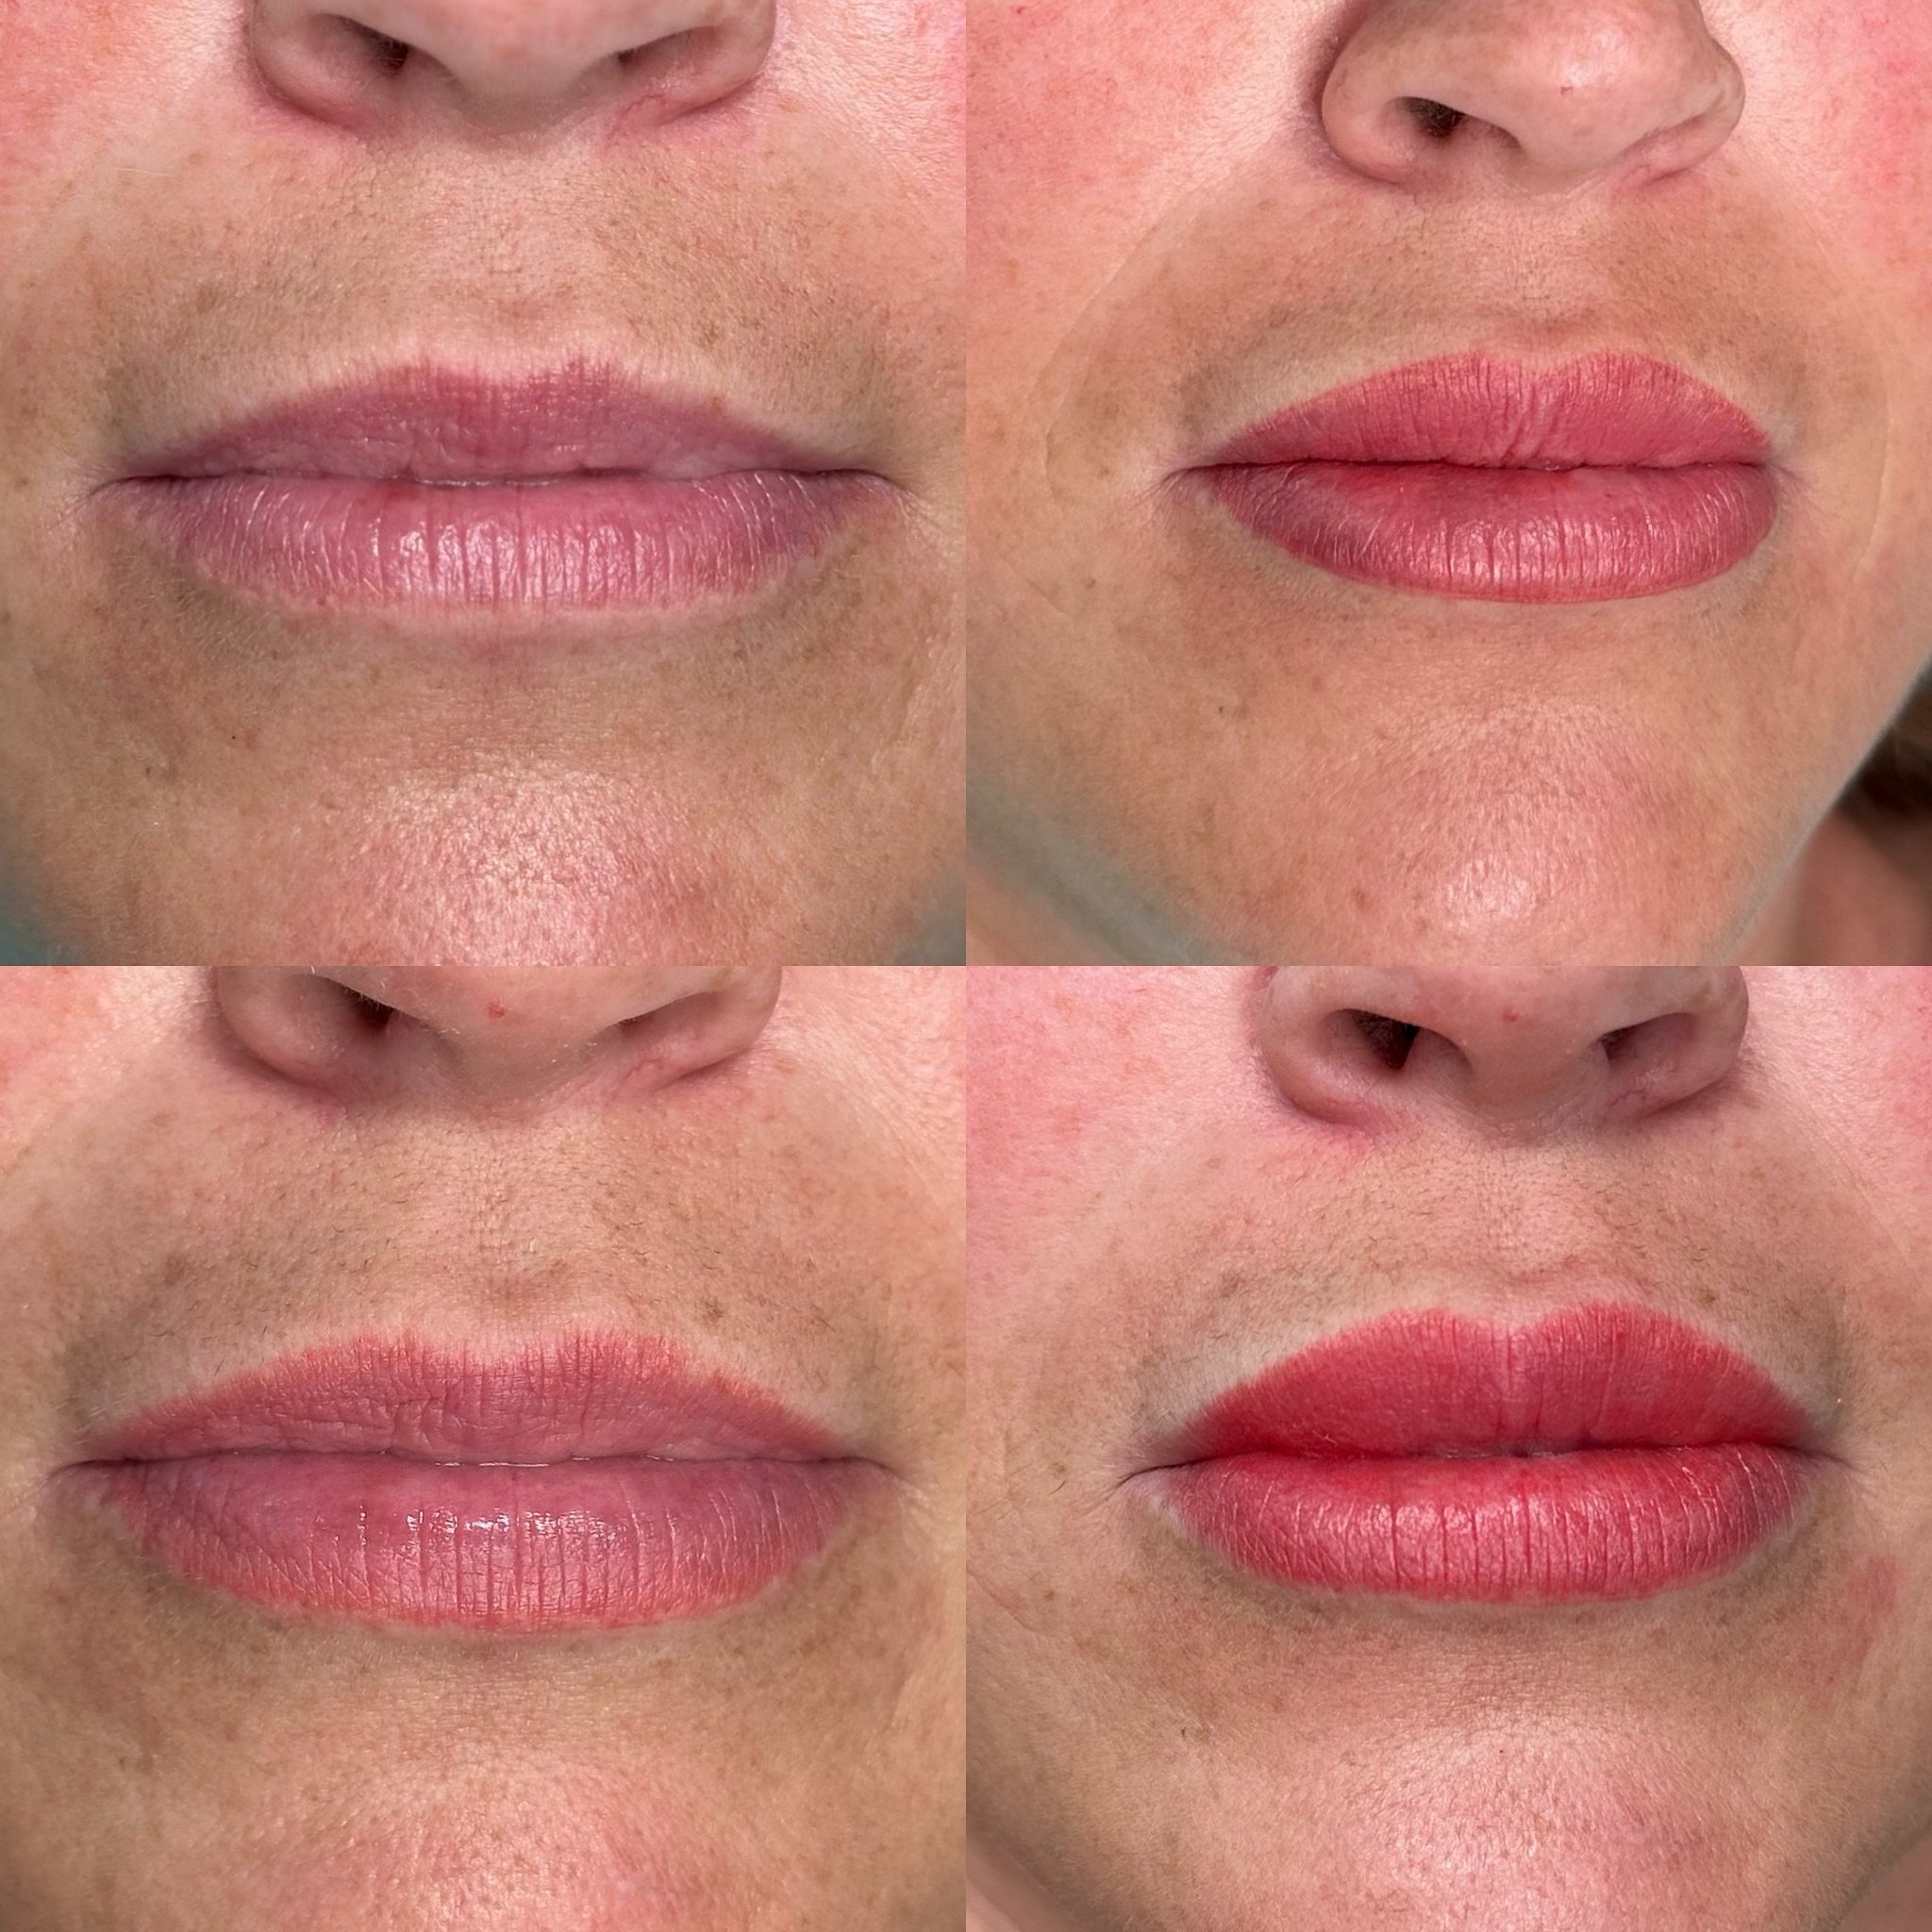 Lip blush through each phase of the appointment process! First pic is no color, second is after the first appointment, third is healed after 6 weeks, and last is after the touchup. The inspiration color for this is poppy and watermelon pink. We went 